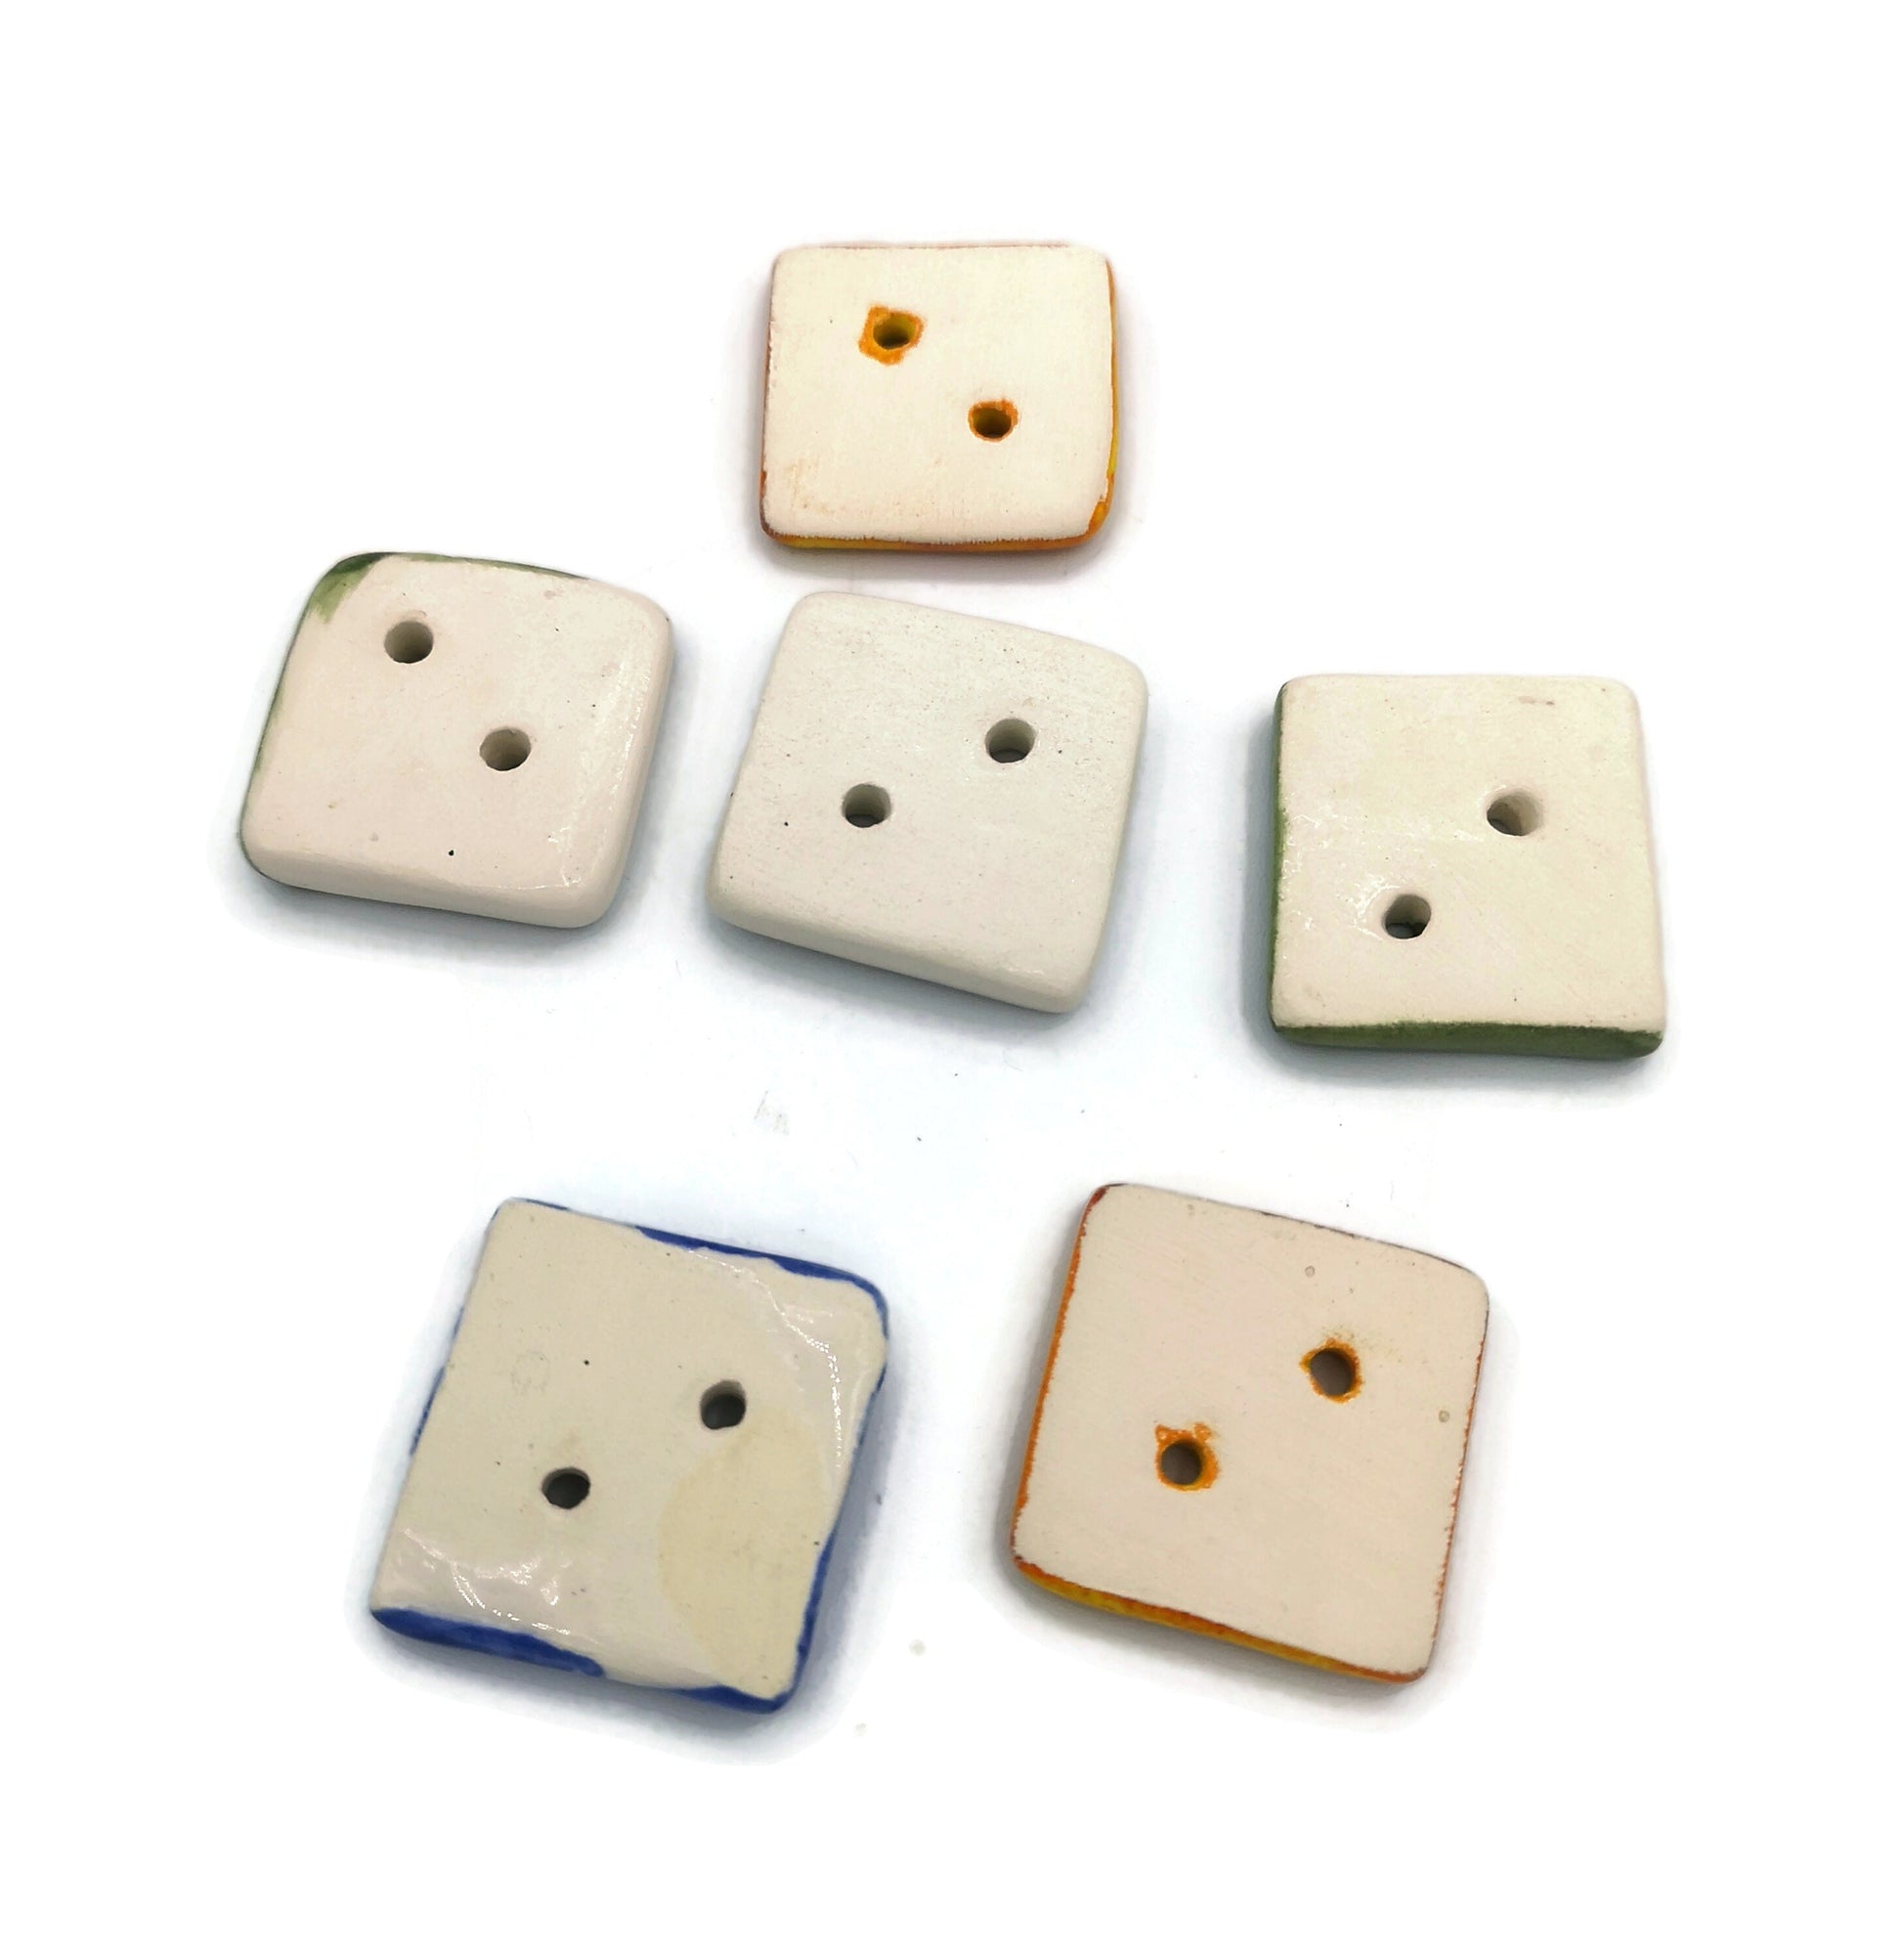 6Pc 30mm Extra Large Square Sewing Buttons For Crafts, Handmade Ceramic Sewing Supplies And Notions, Cute Strange And Unusual Hand Painted - Ceramica Ana Rafael